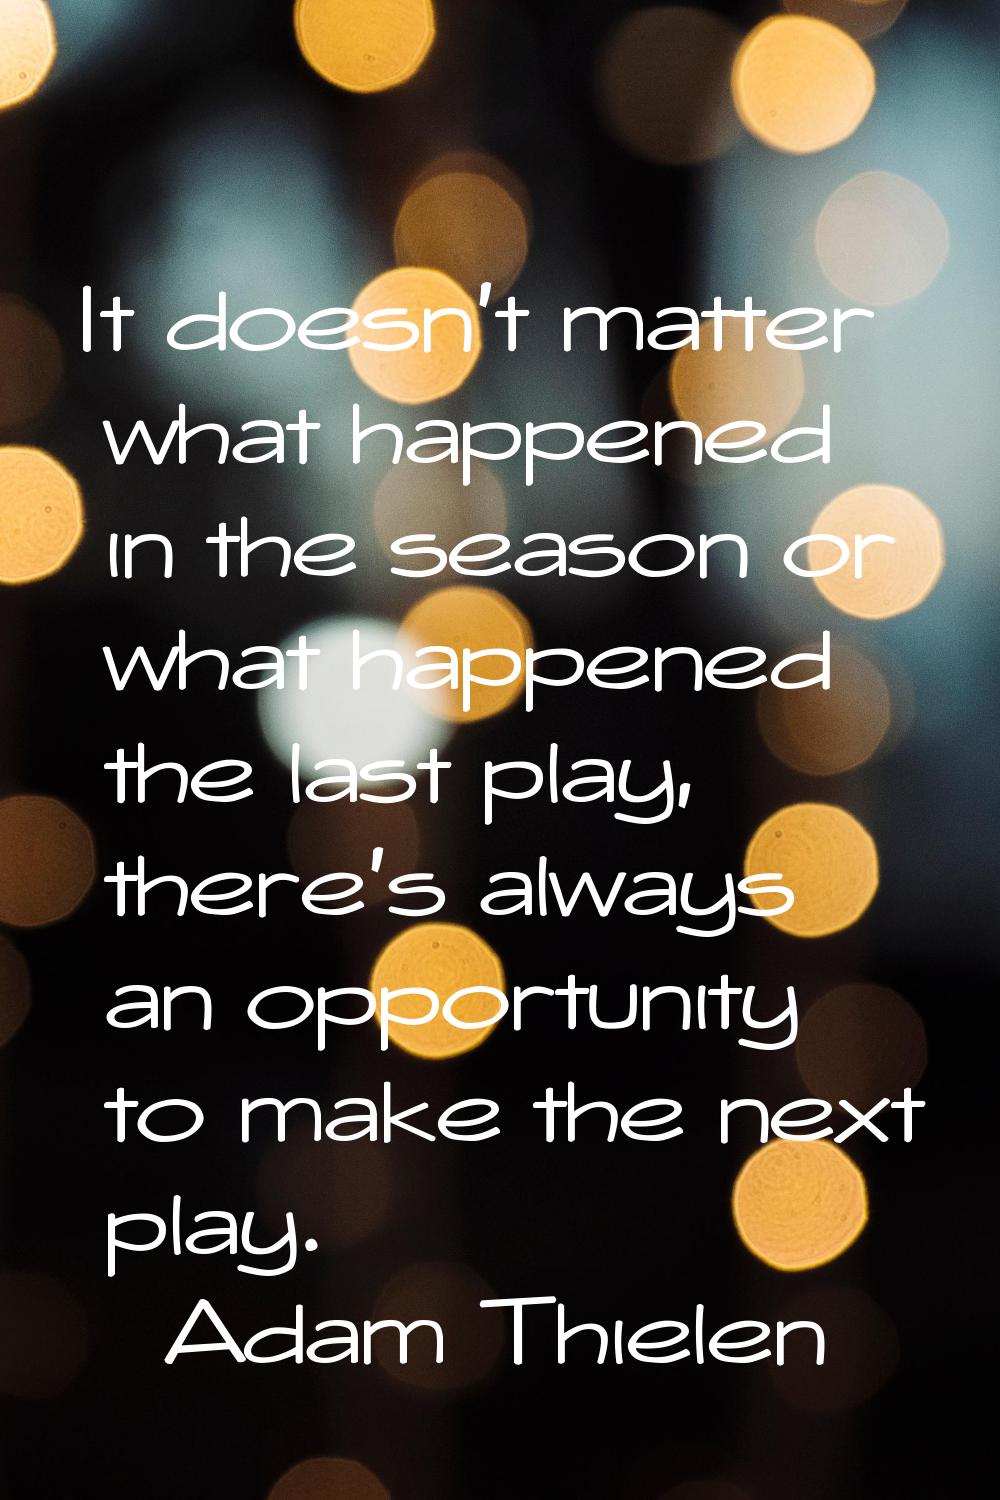 It doesn't matter what happened in the season or what happened the last play, there's always an opp